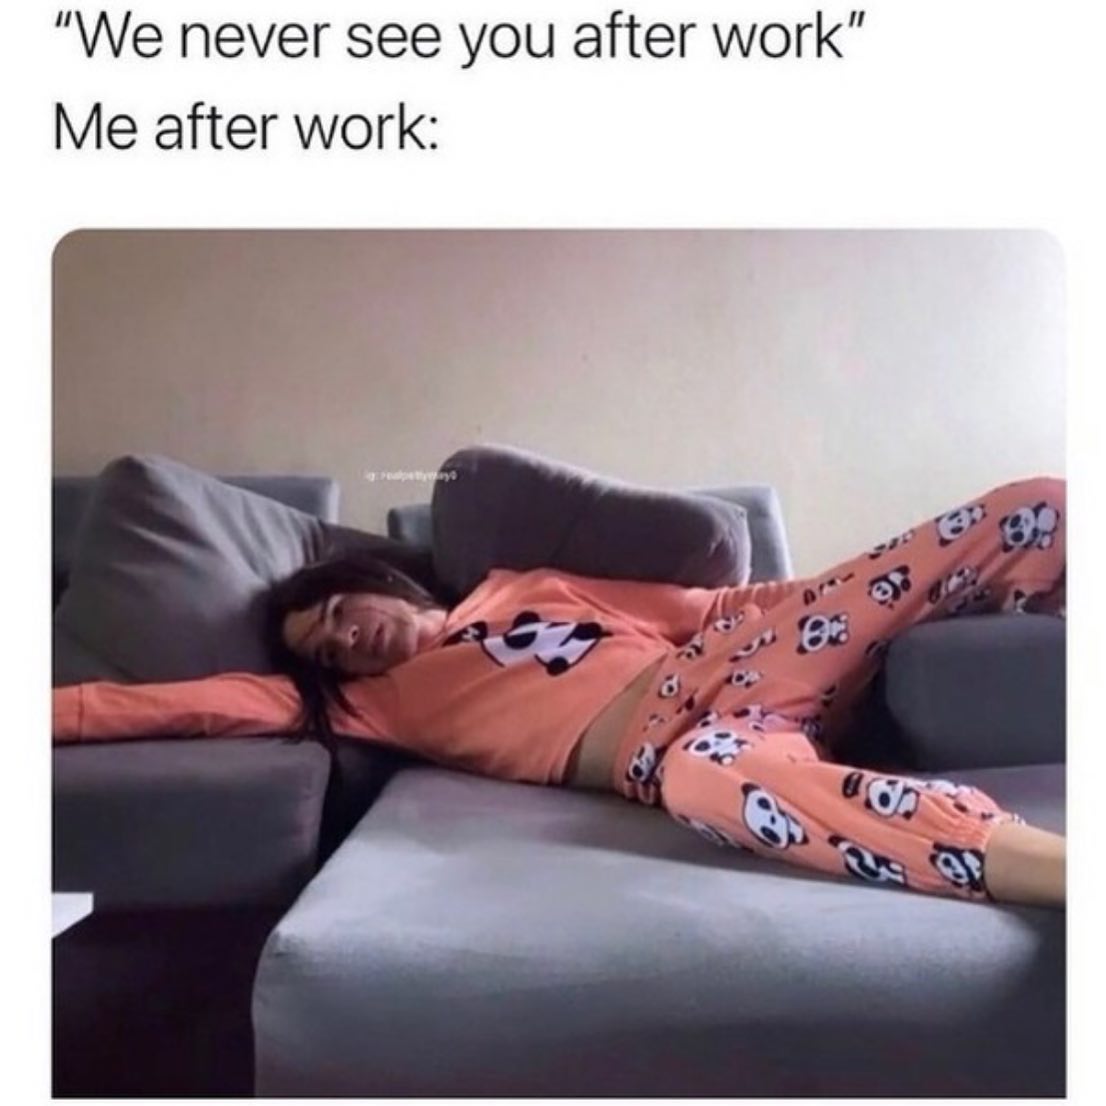 meme about doing nothing after work